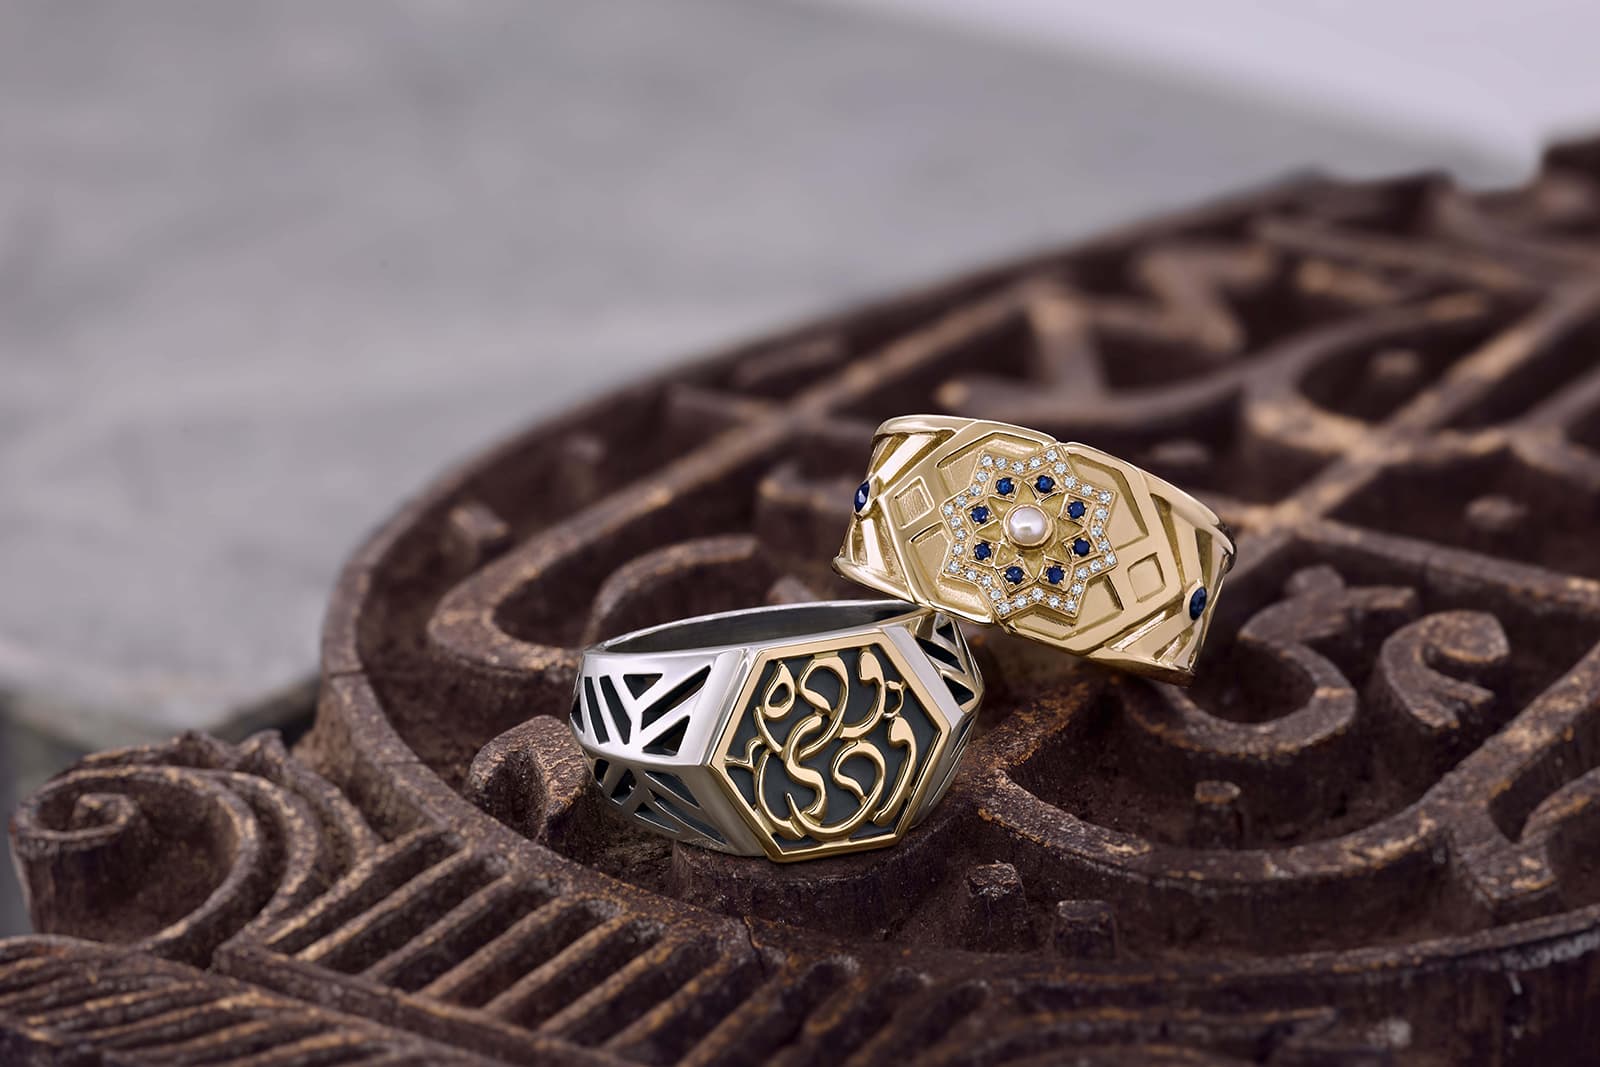 Azza Fahmy 'Mamluk' collection ‘Qalawun’ ring with diamonds, sapphires and pearls, and the  ‘Minaret’ ring, both in yellow gold and sterling silver